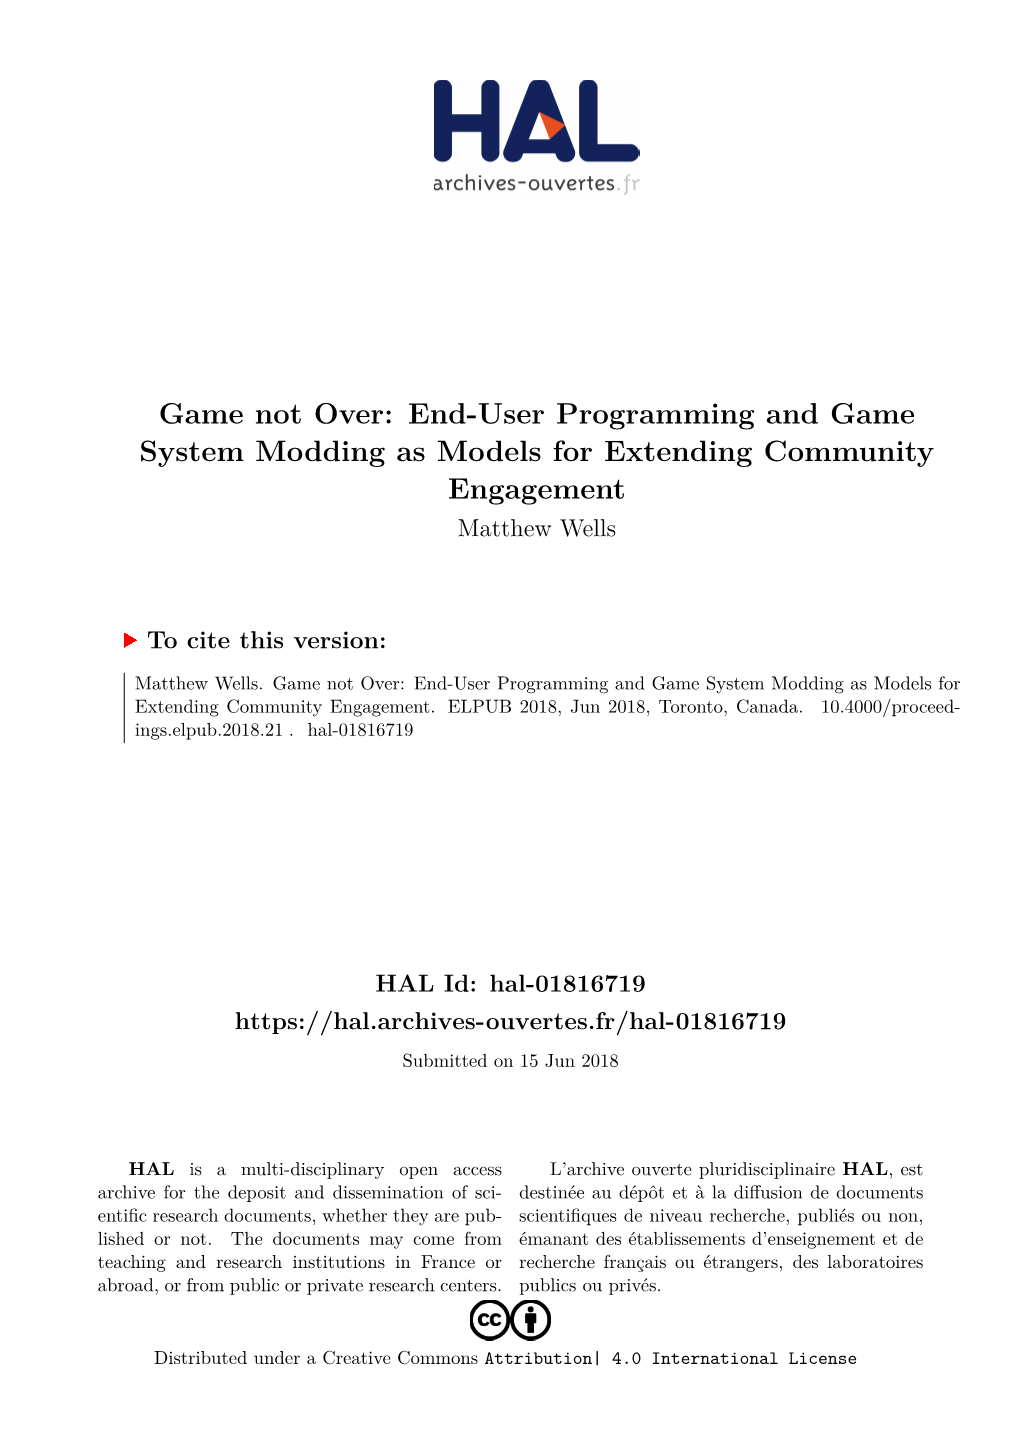 End-User Programming and Game System Modding As Models for Extending Community Engagement Matthew Wells